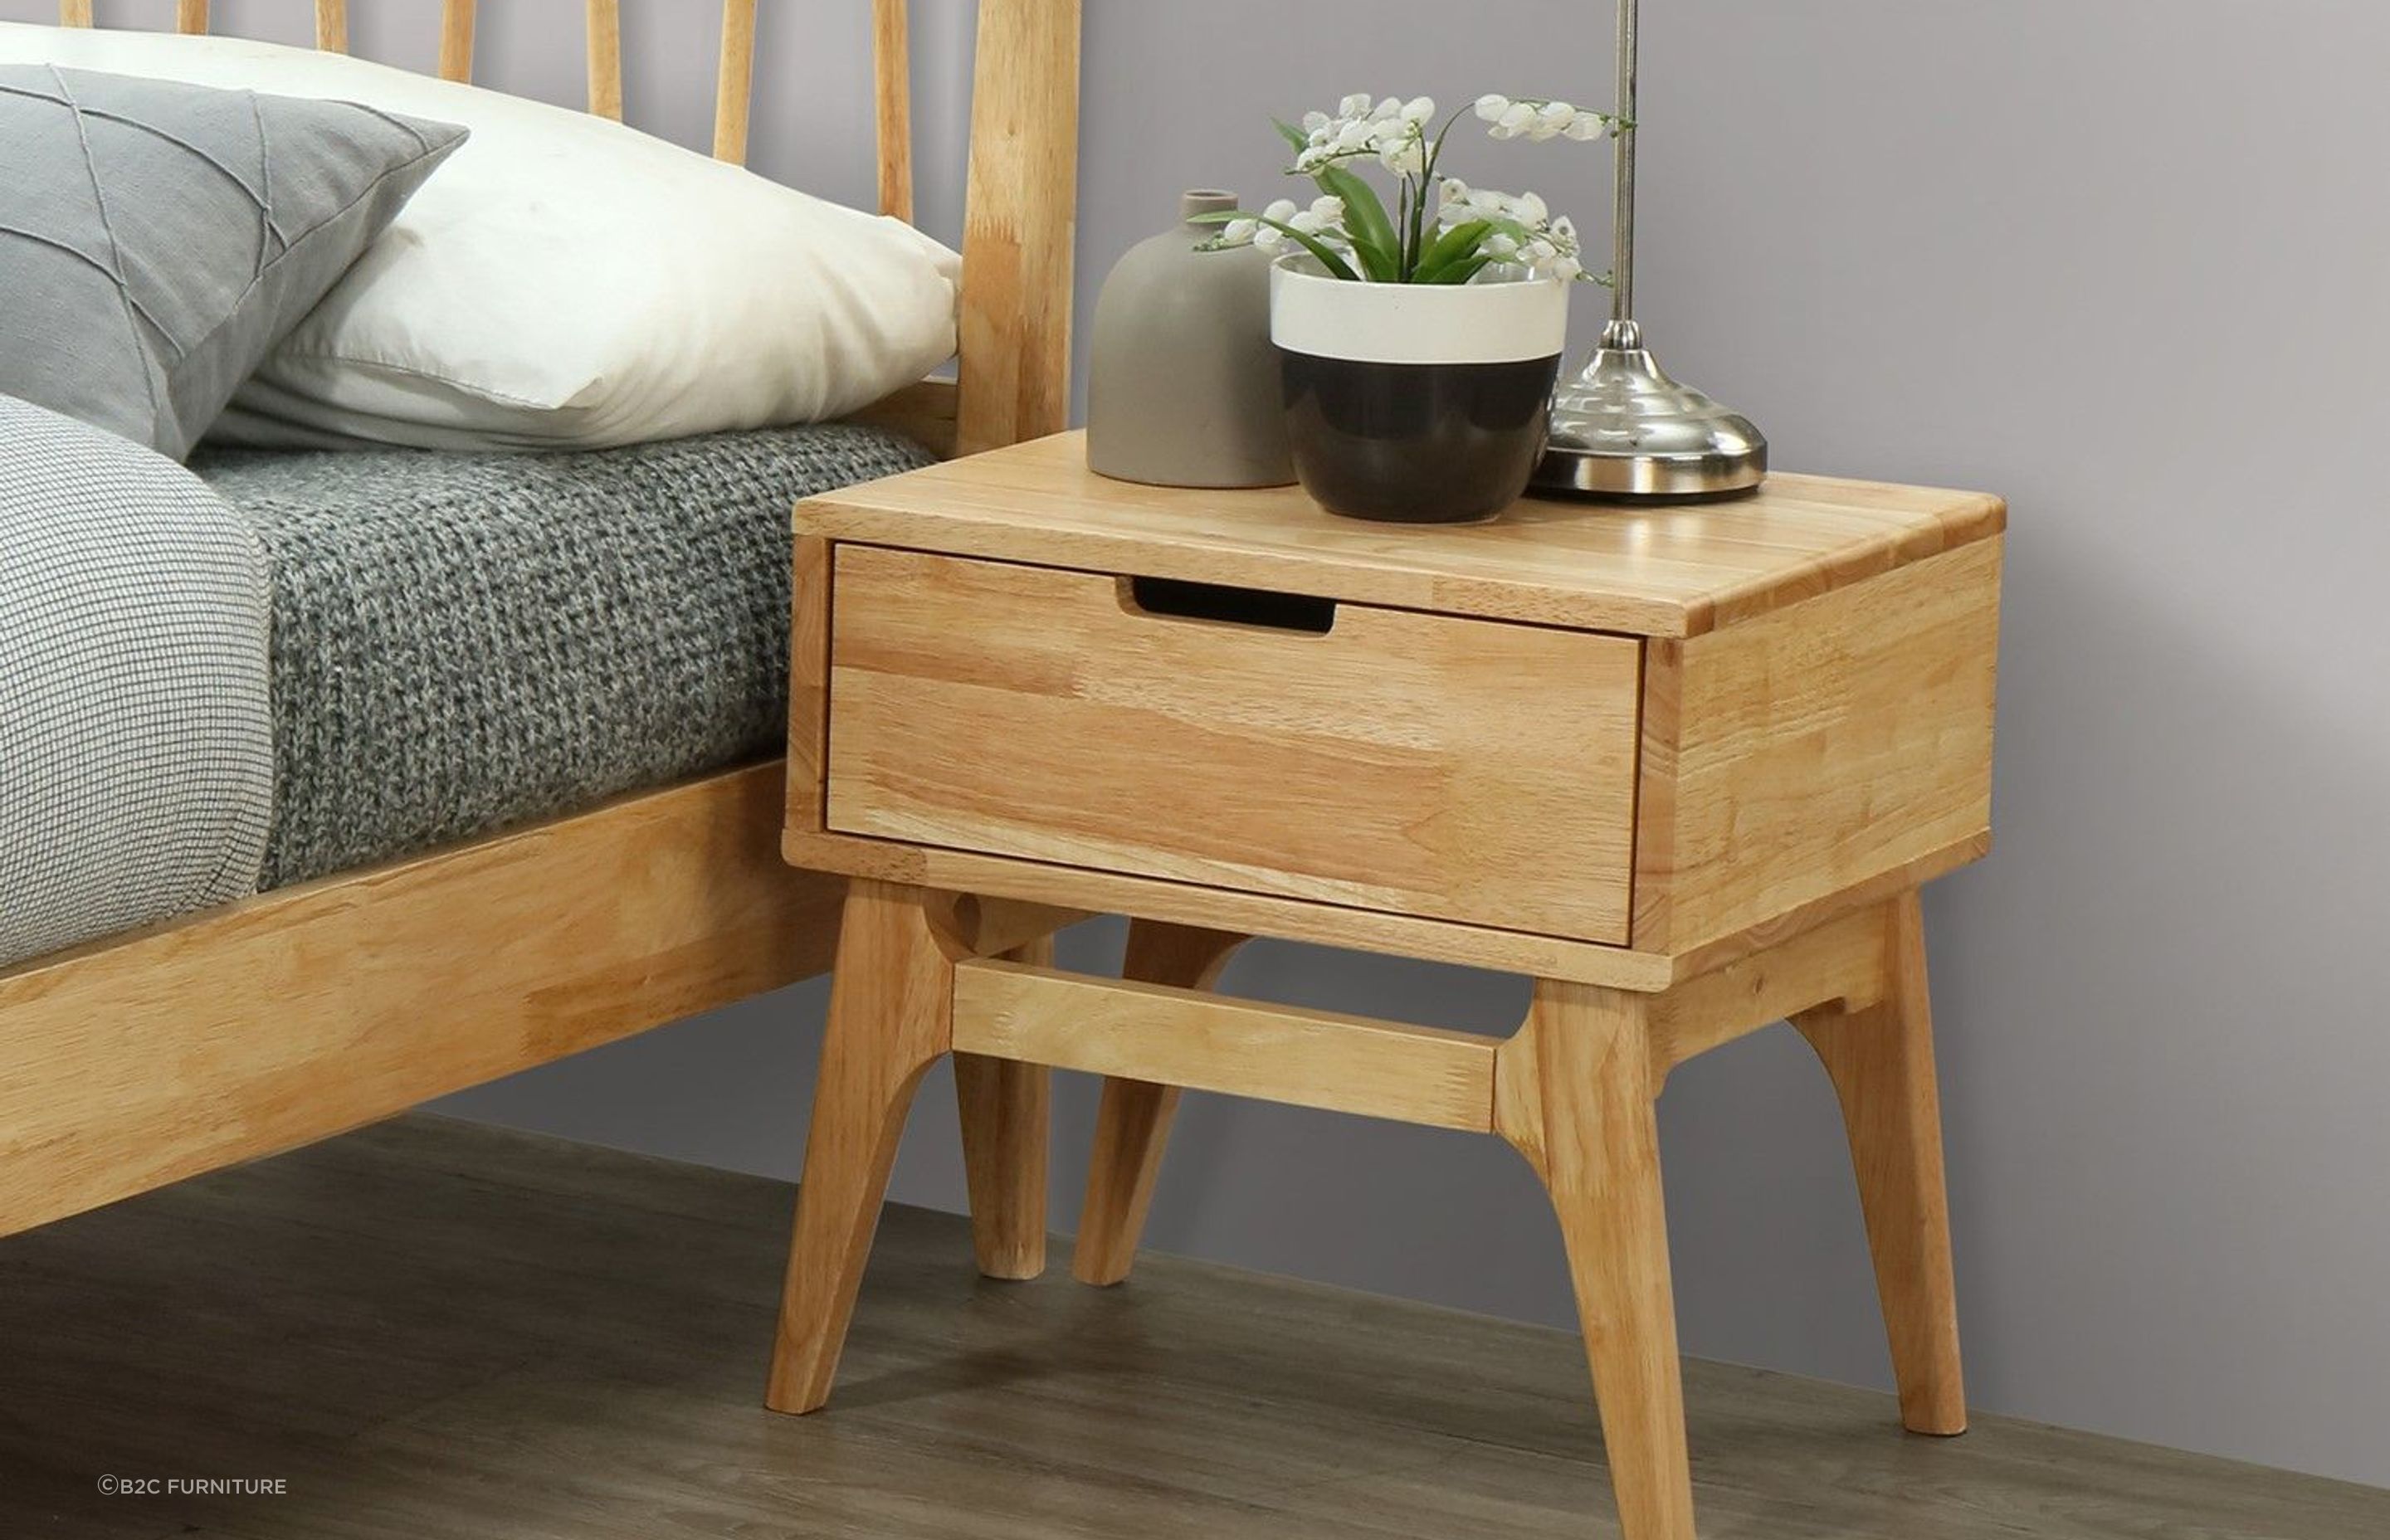 Hardwood bedside tables showcase the natural beauty of different hardwoods such as timber. Featured product: Paris Hardwood Bedside Table